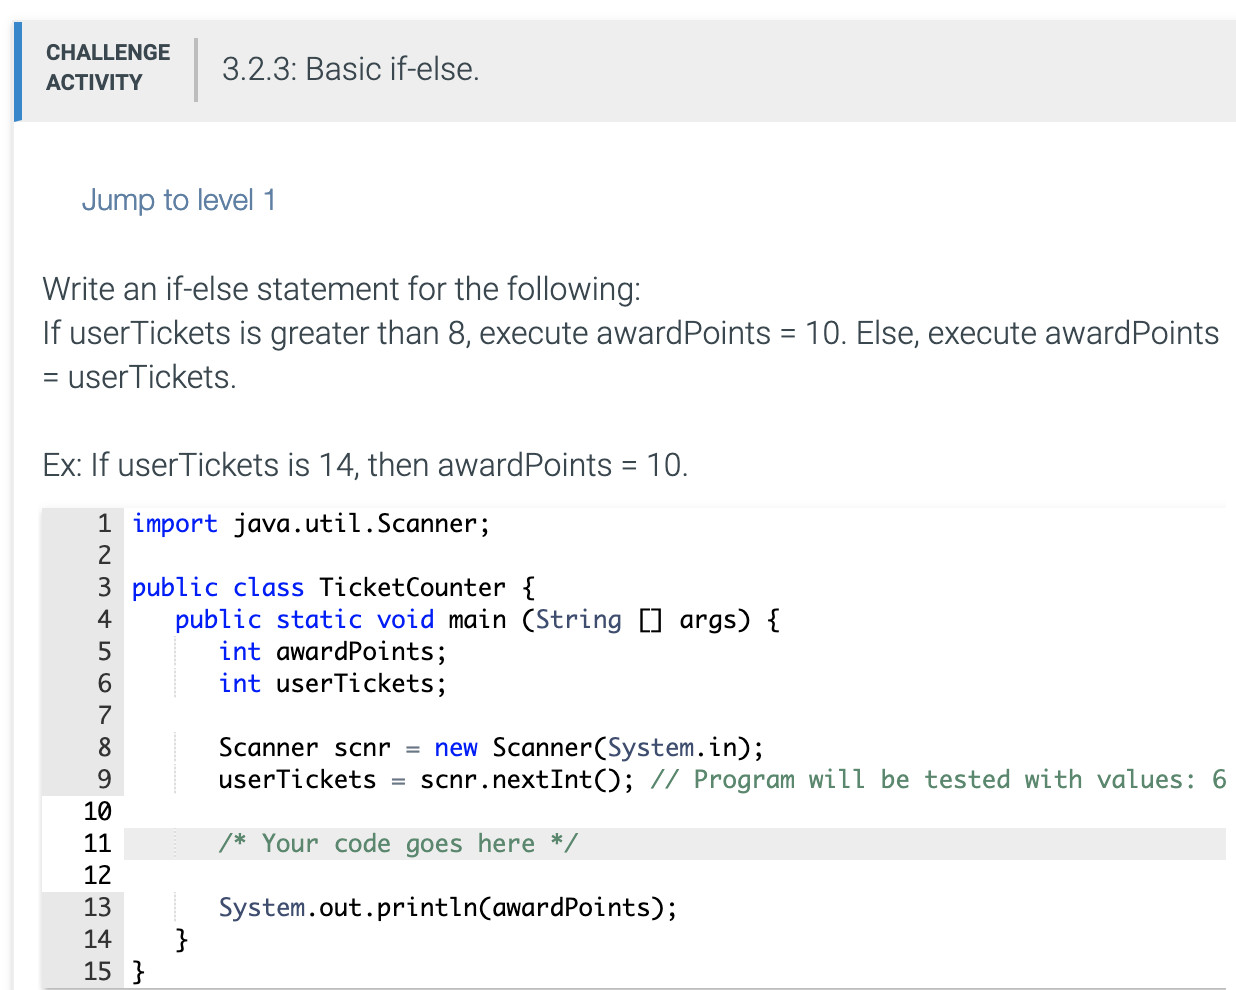 Write an if-else statement for the following:
If userTickets is greater than 8, execute awardPoints = 10. Else, execute awardPoints
= userTickets.
Ex: If userTickets is 14, then awardPoints = 10.
1 import java.util.Scanner;
2
3 public class TicketCounter {
public static void main (String [] args) {
int awardPoints;
int userTickets;
4
6.
7
Scanner scnr = new Scanner(System.in);
userTickets
8
9.
scnr.nextInt(); // Program will be tested with values: 6
%3D
10
11
/* Your code goes here */
12
System.out.println(awardPoints);
}
13
14
15 }
